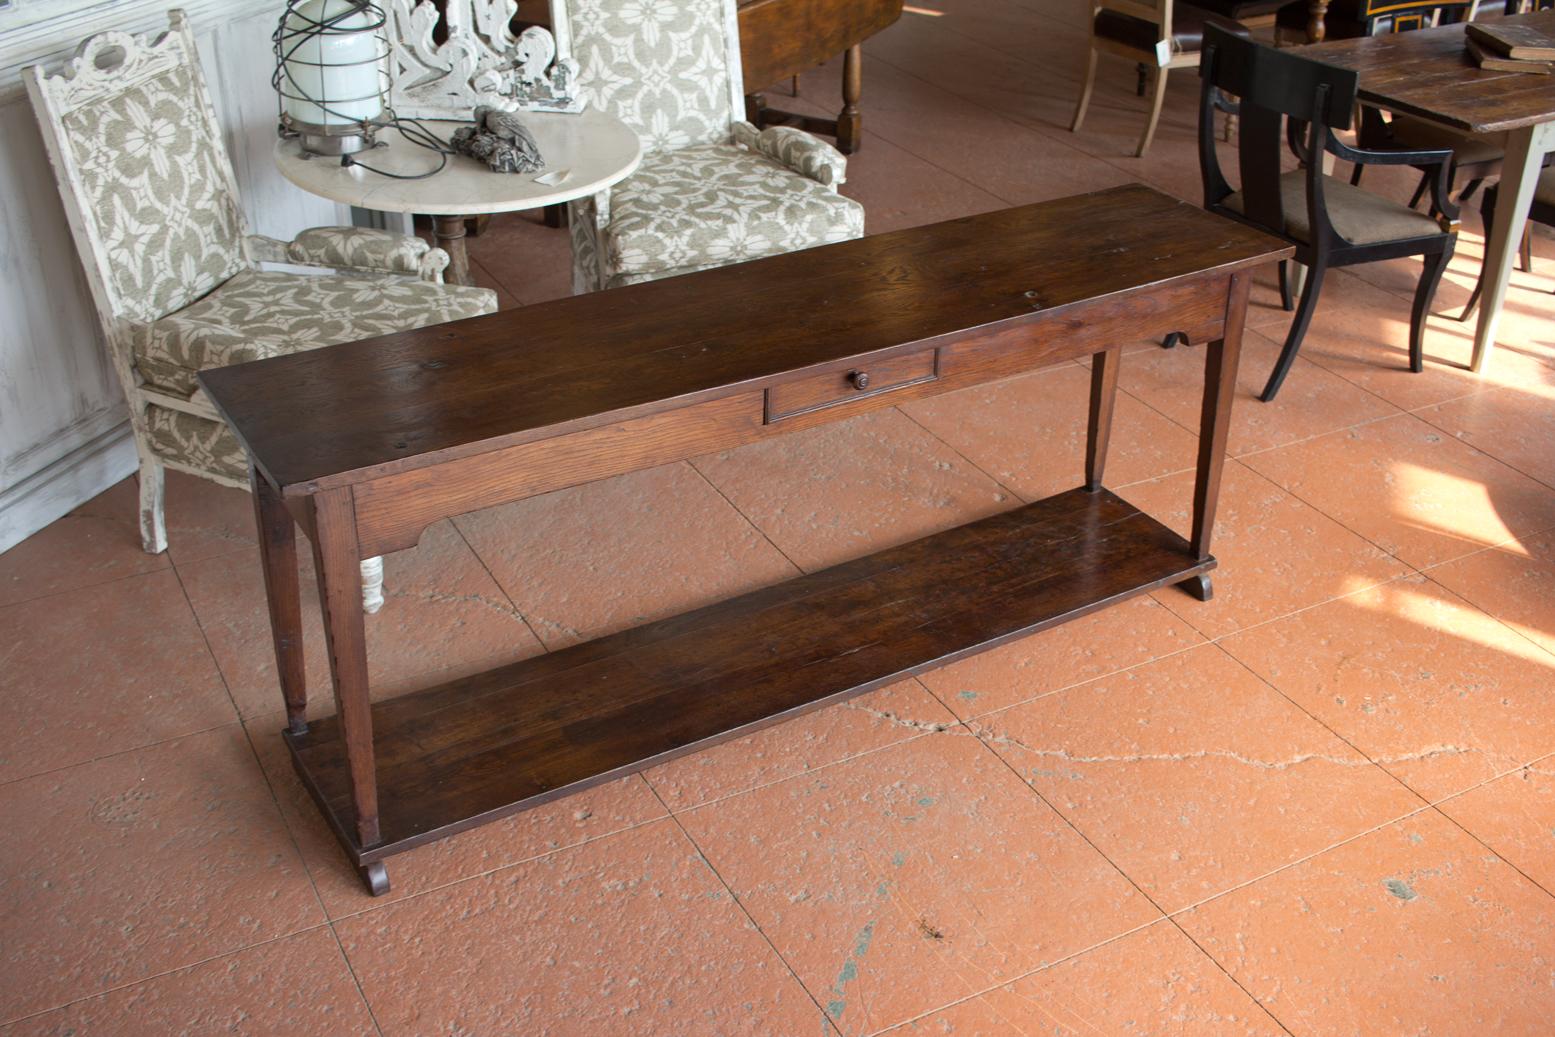 Antique Burgundian oak farmhouse work table or server or console with a single drawer and shelf below sitting on pencil shaped legs. Lovely rich patina.